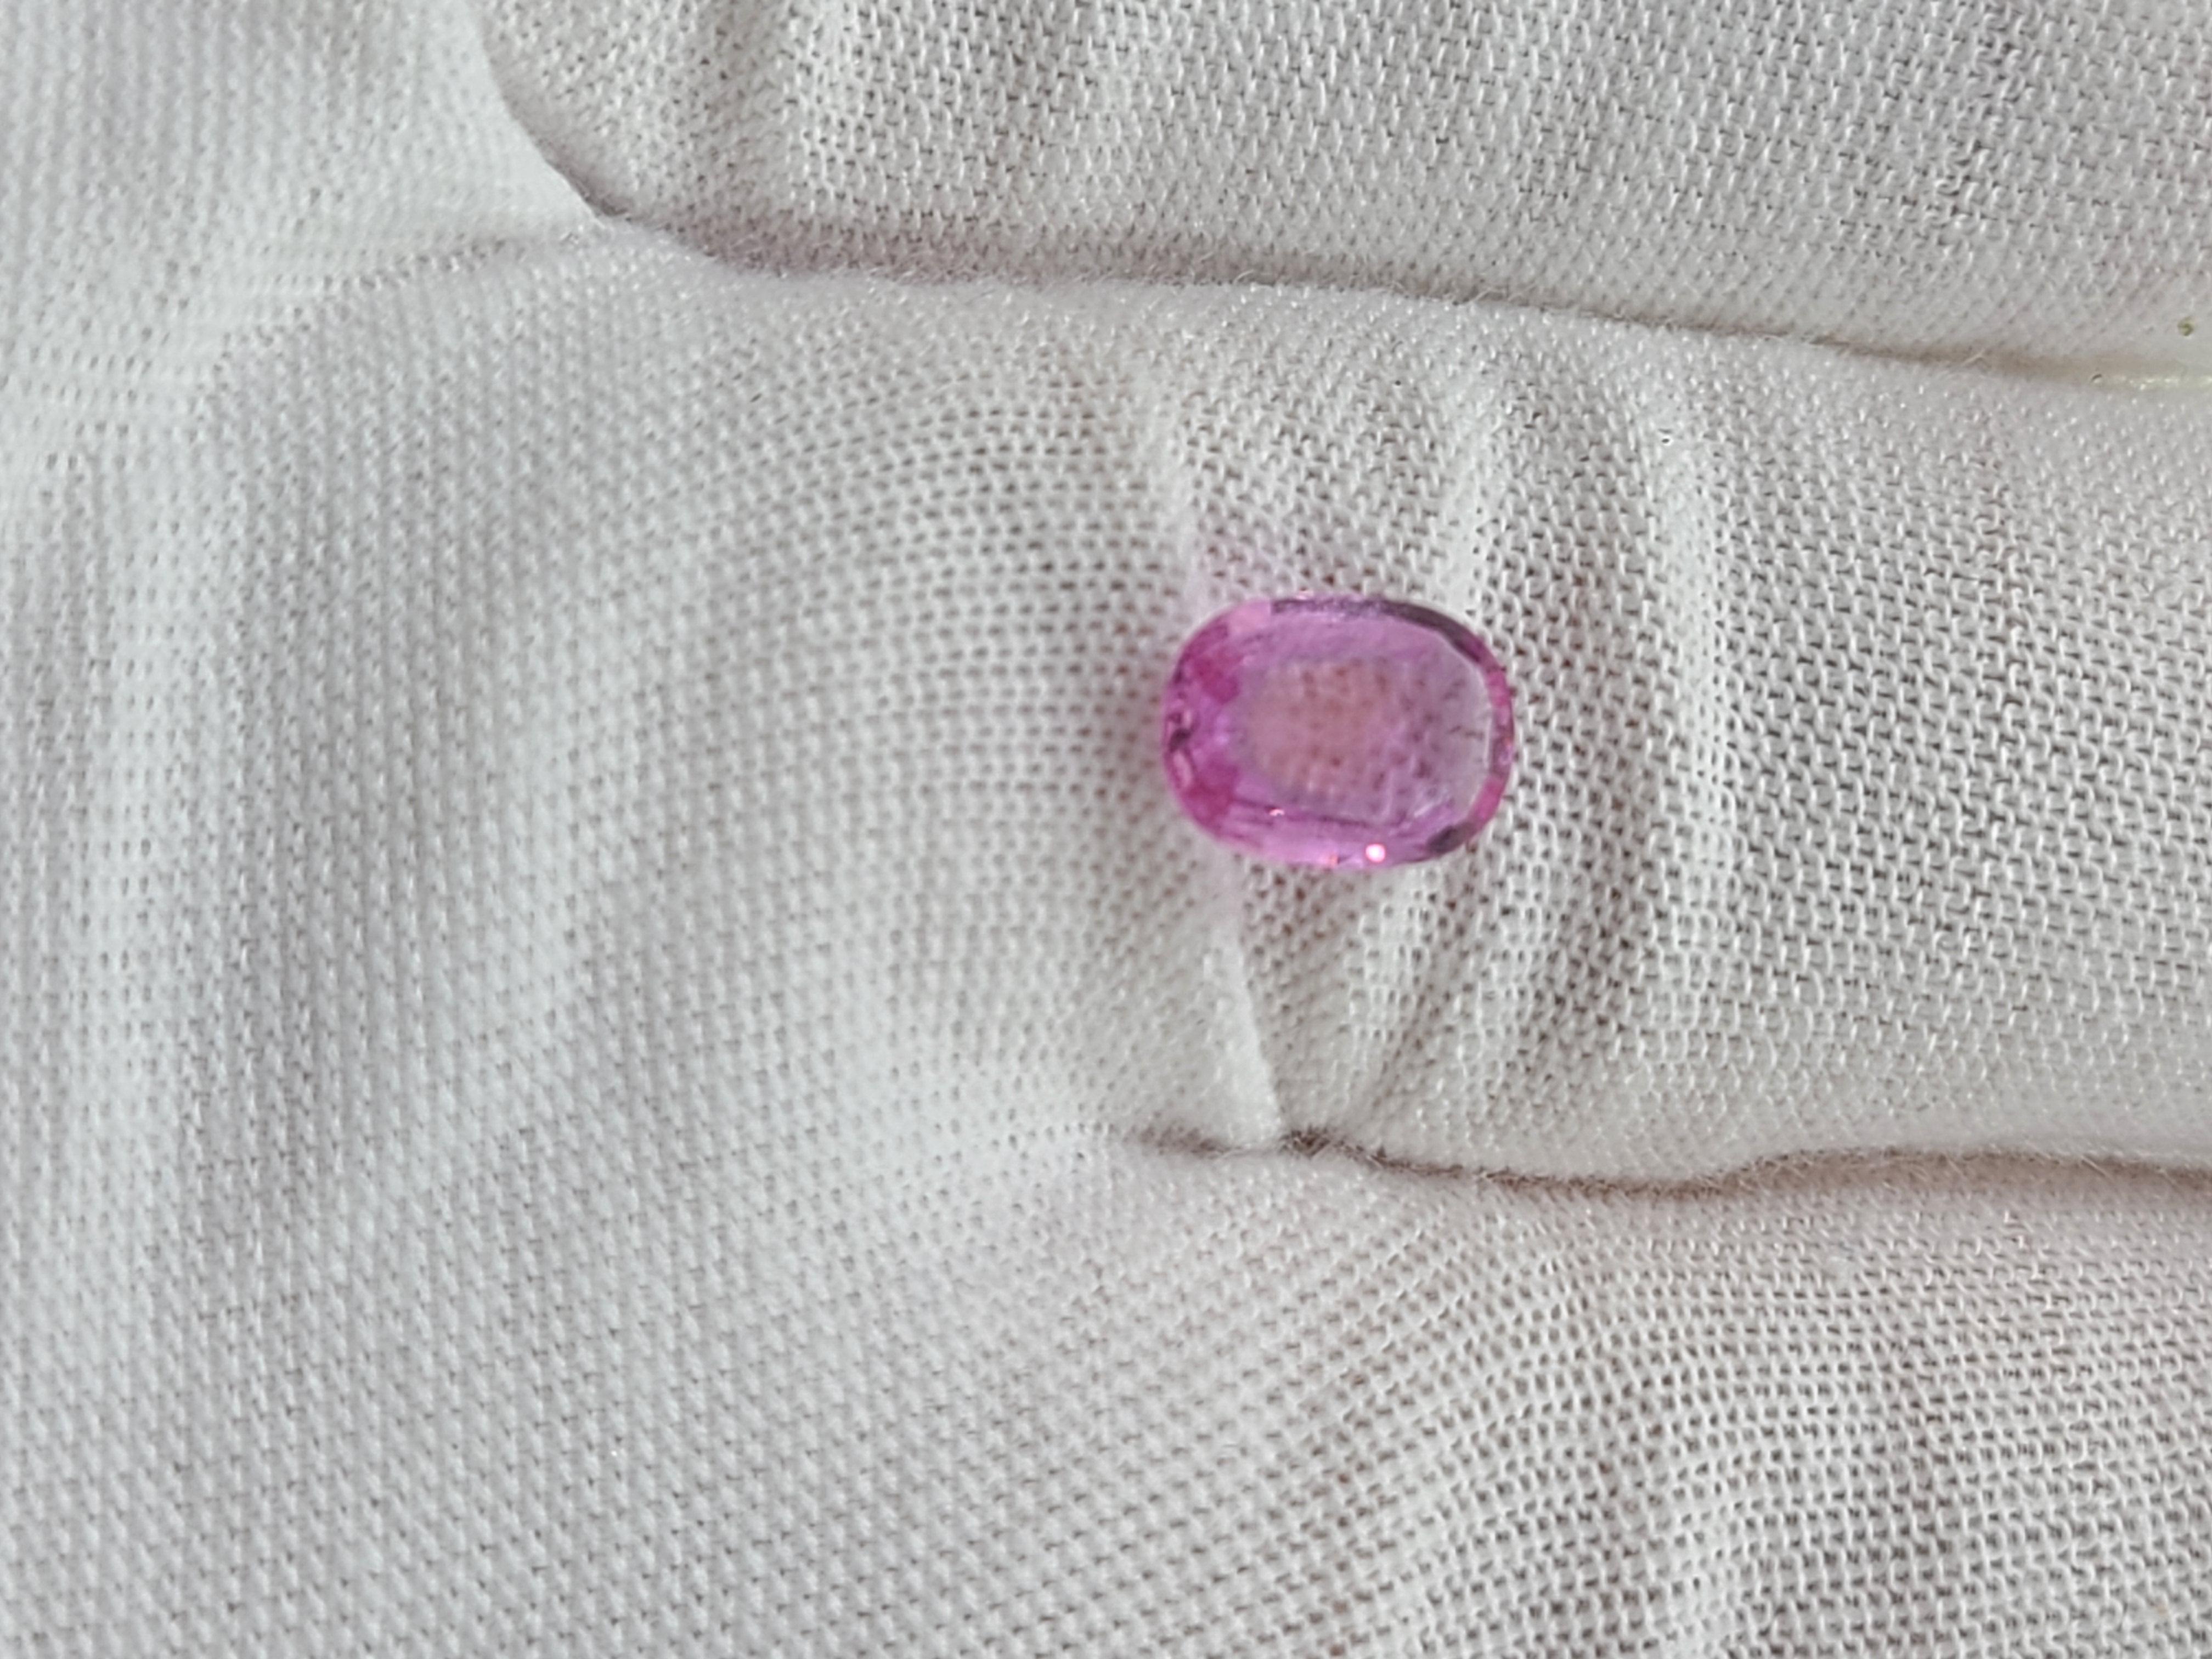 Women's or Men's 1.15 Carat Pink Sapphire 8x5mm Oval Faceted Cut - Single Loose Stone For Sale